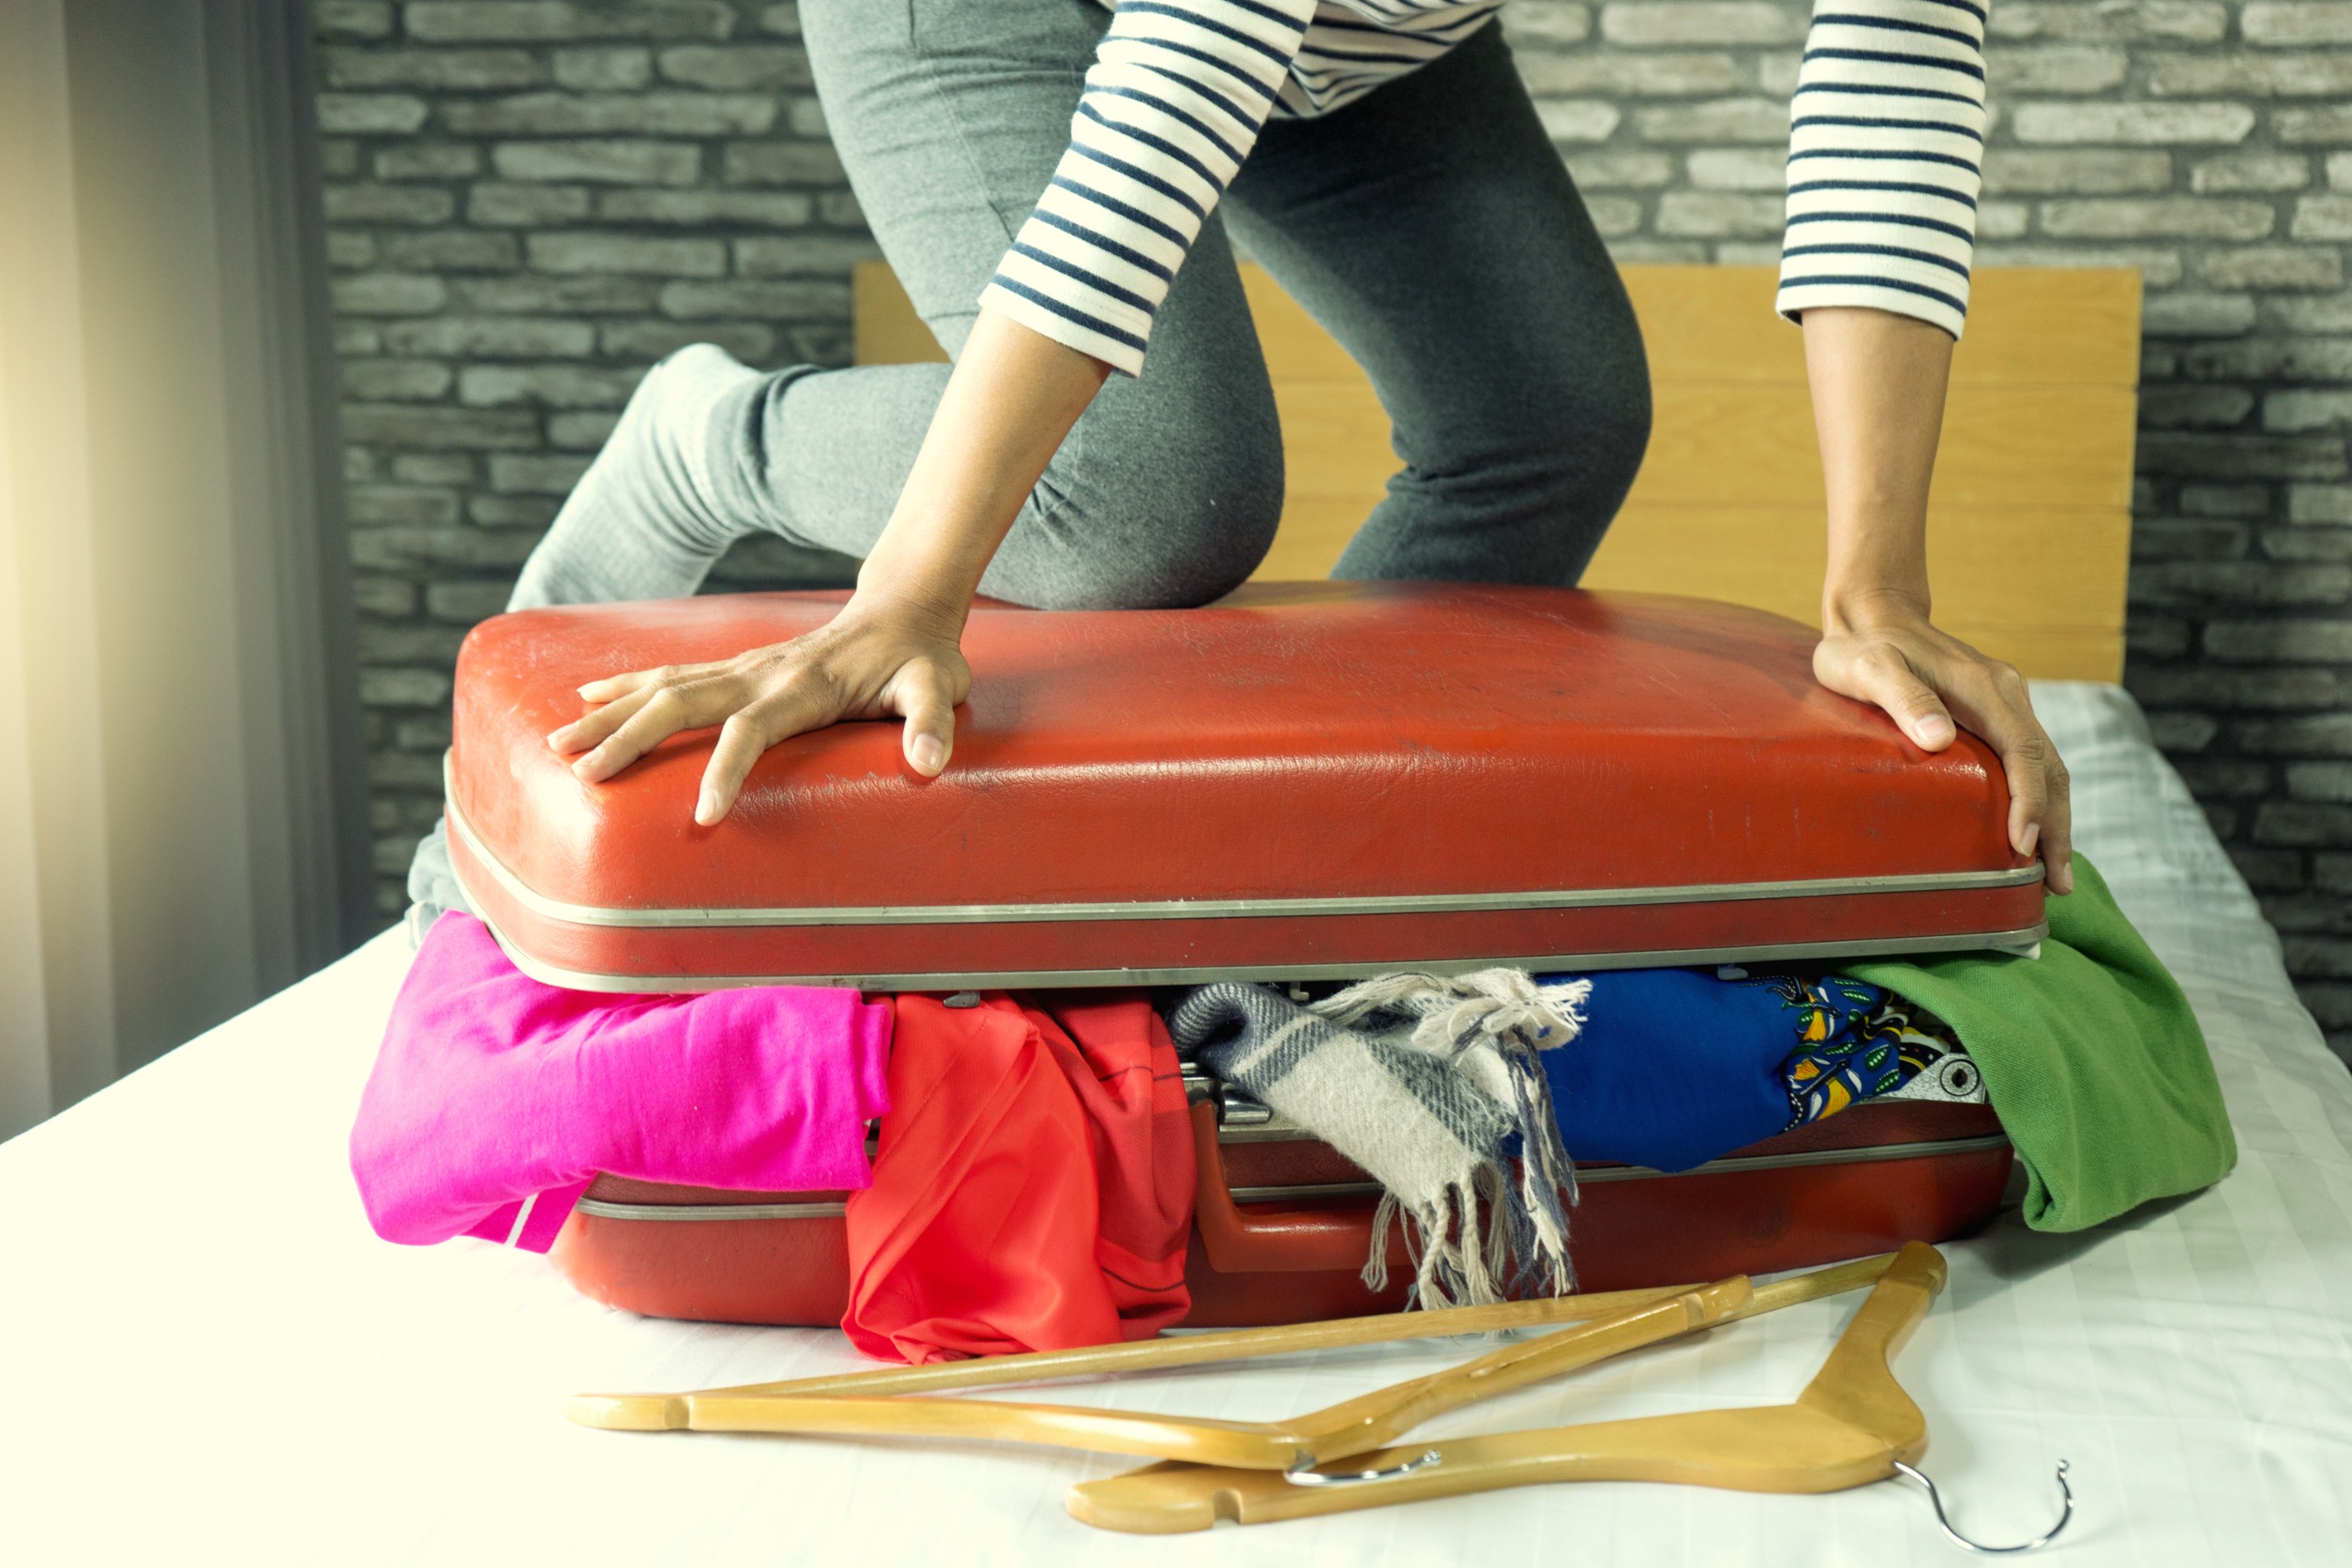 Women kneeling on top of luggage trying to close it